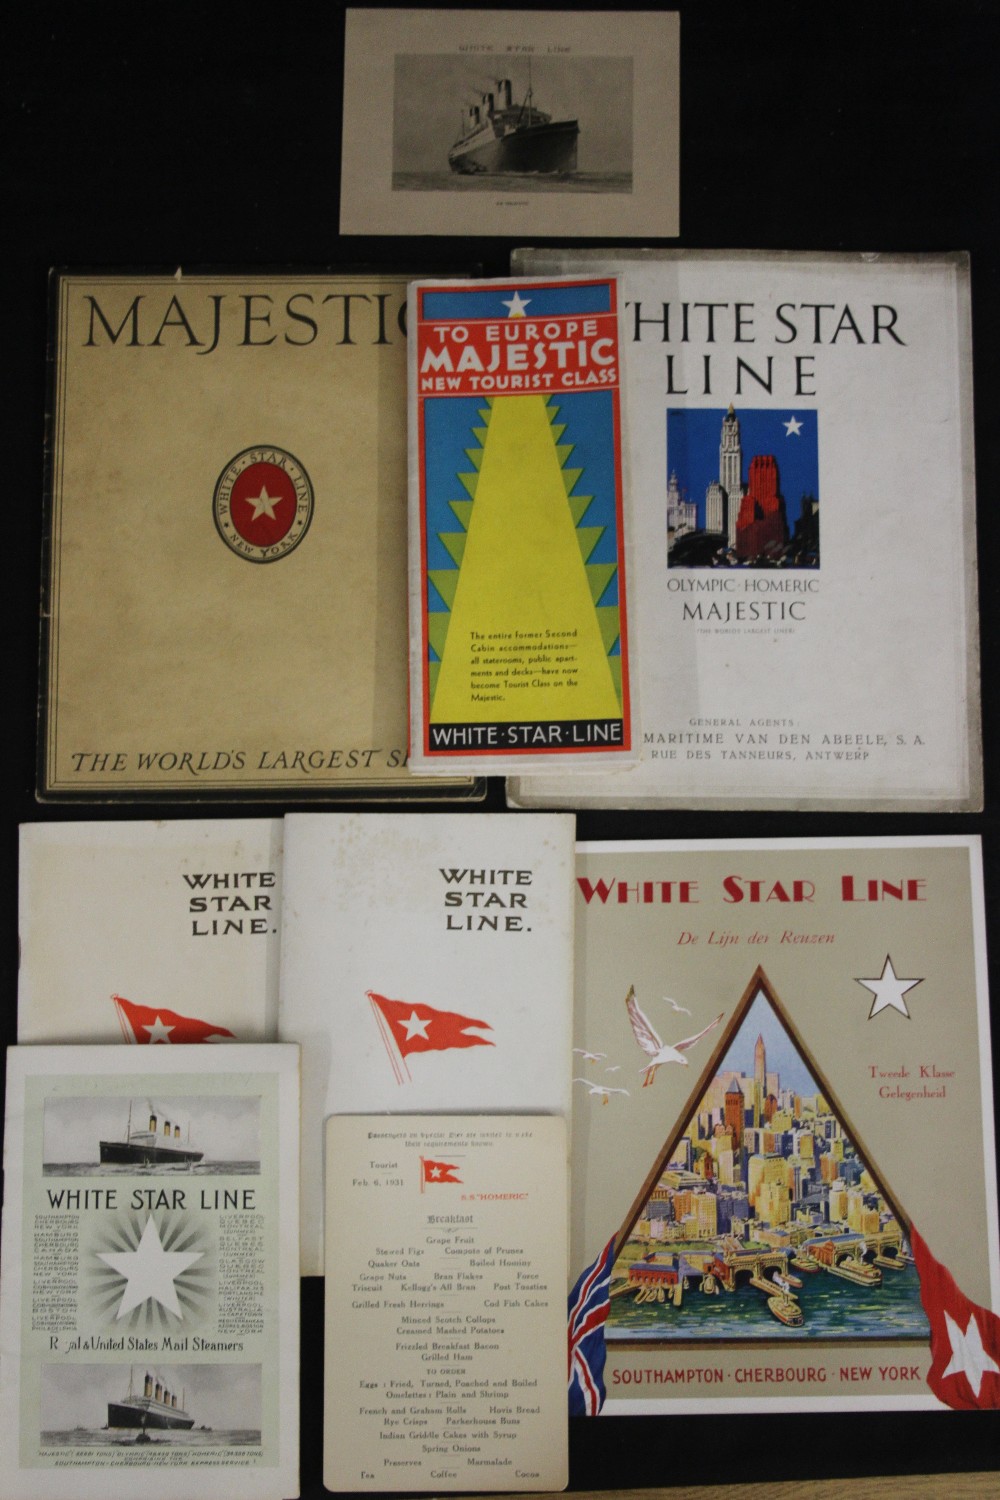 WHITE STAR LINE: Promotional brochures to include Olympic and Majestic, plus passenger lists, log